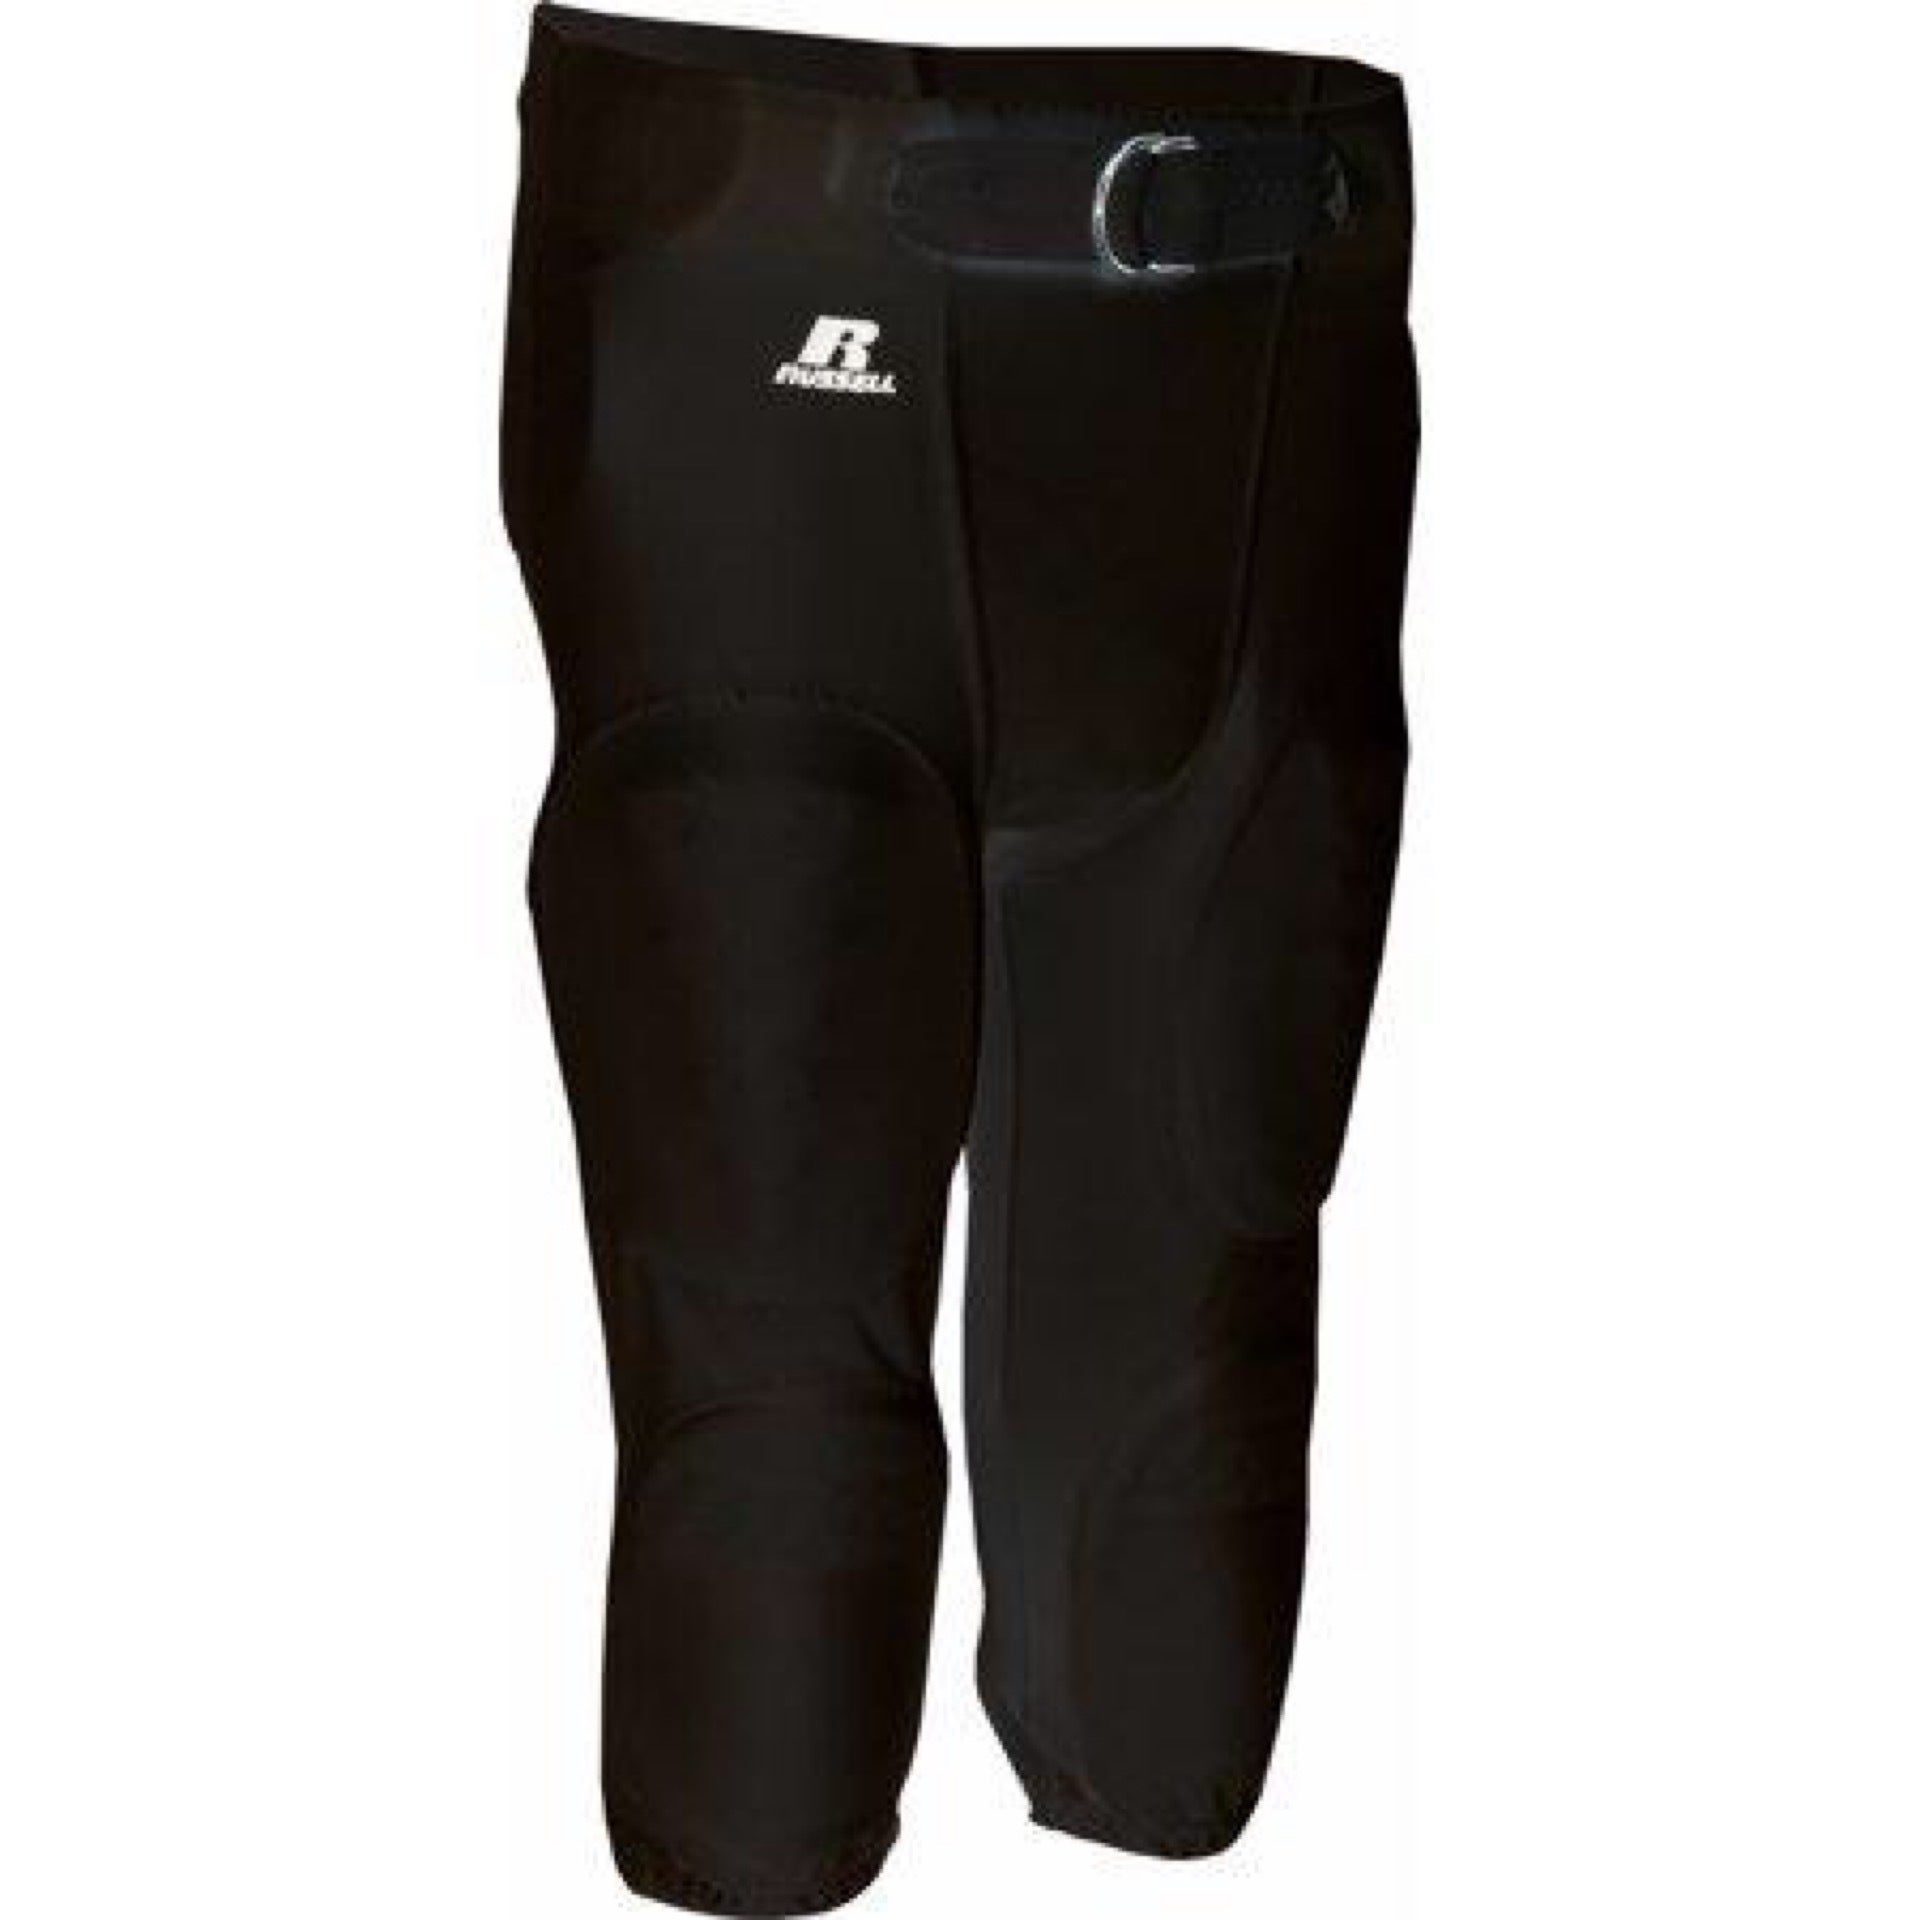 Russell Adult Football Practice Pant